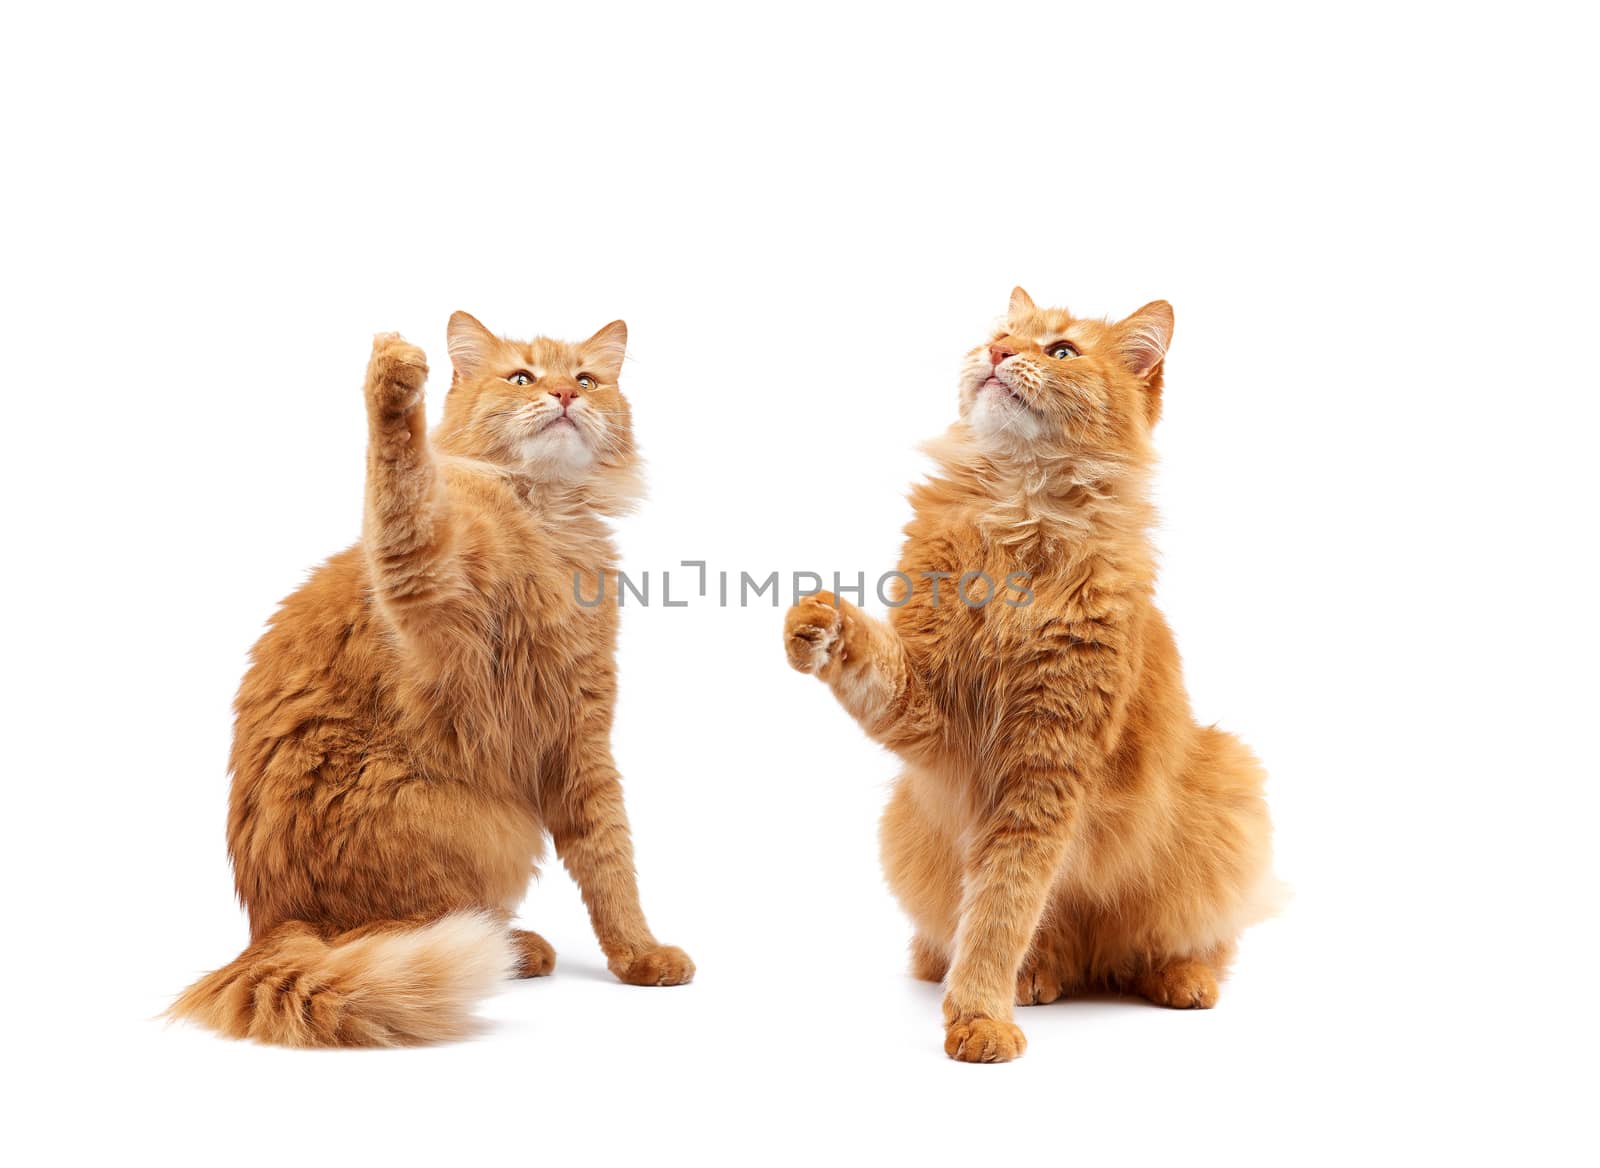 Cute adult fluffy red cat sitting and raised its front paws up, imitation of holding any object, animal isolated on a white background, set